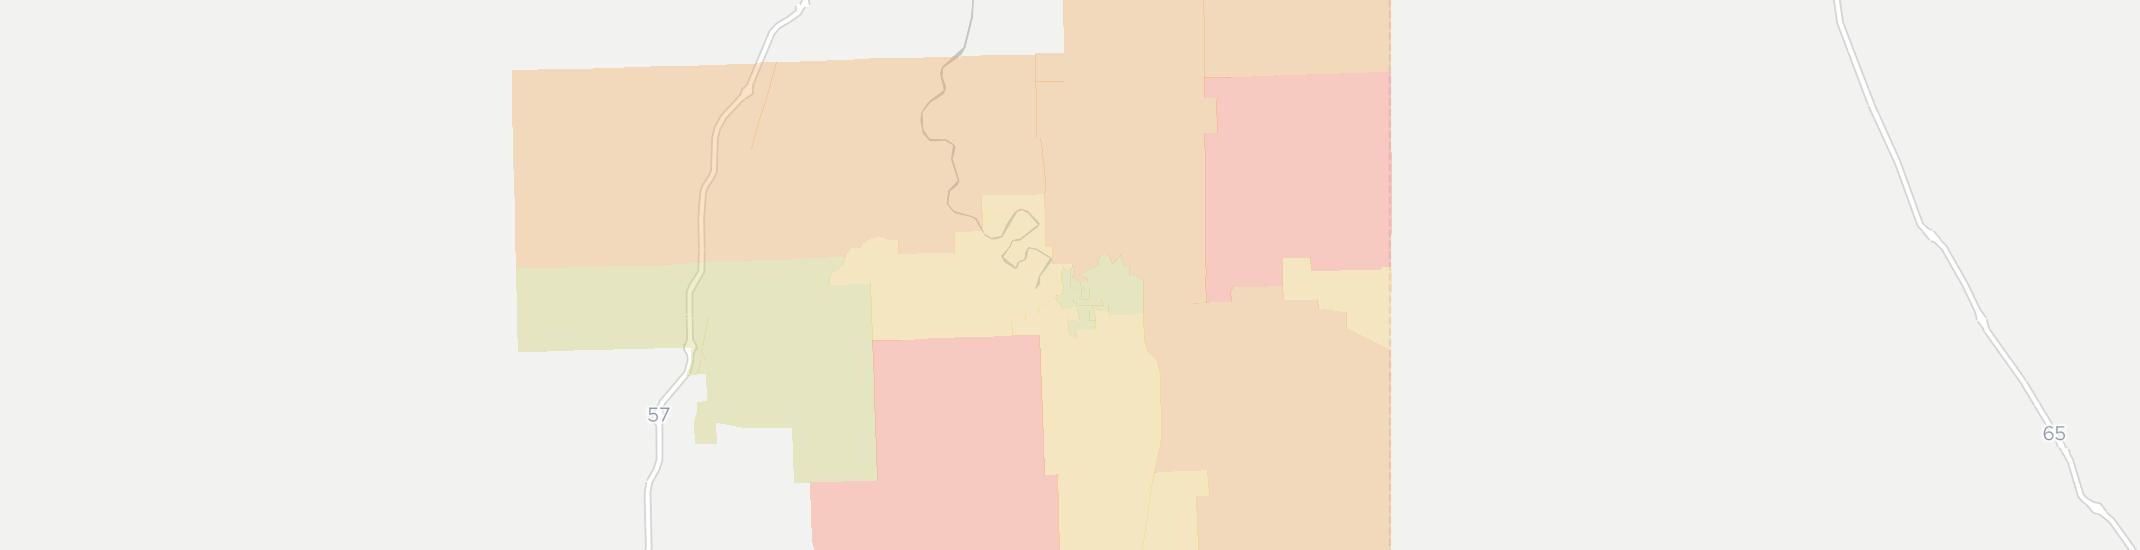 Watseka Internet Competition Map. Click for interactive map.